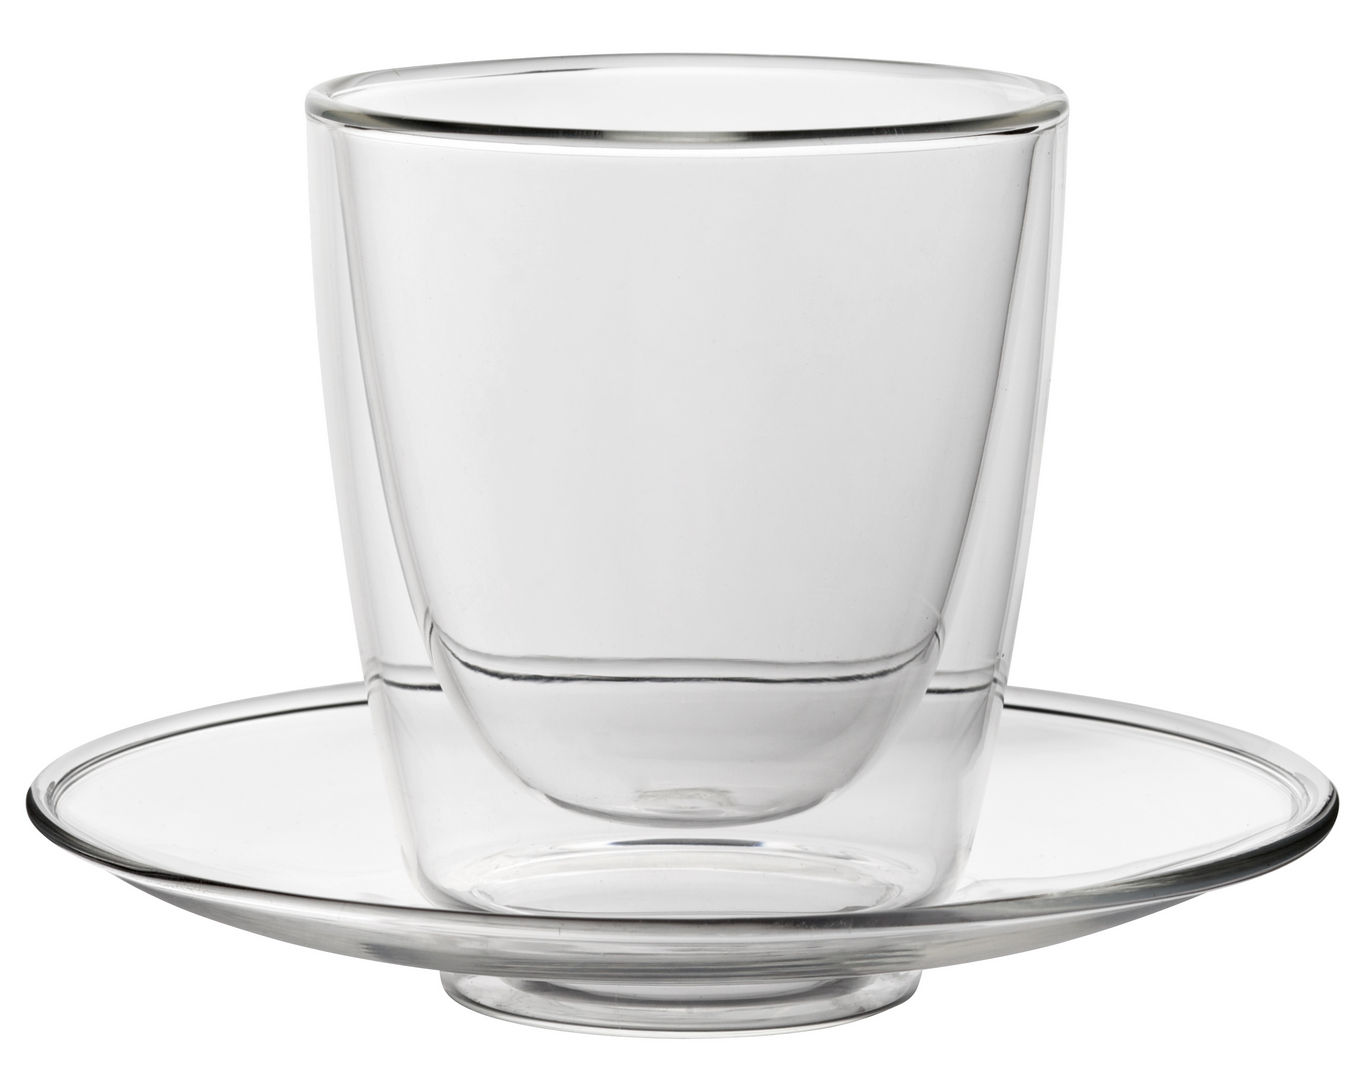 Double - Walled Cappuccino Cup and Saucer 7.75oz - R90044-000000-B01006 (Pack of 6)